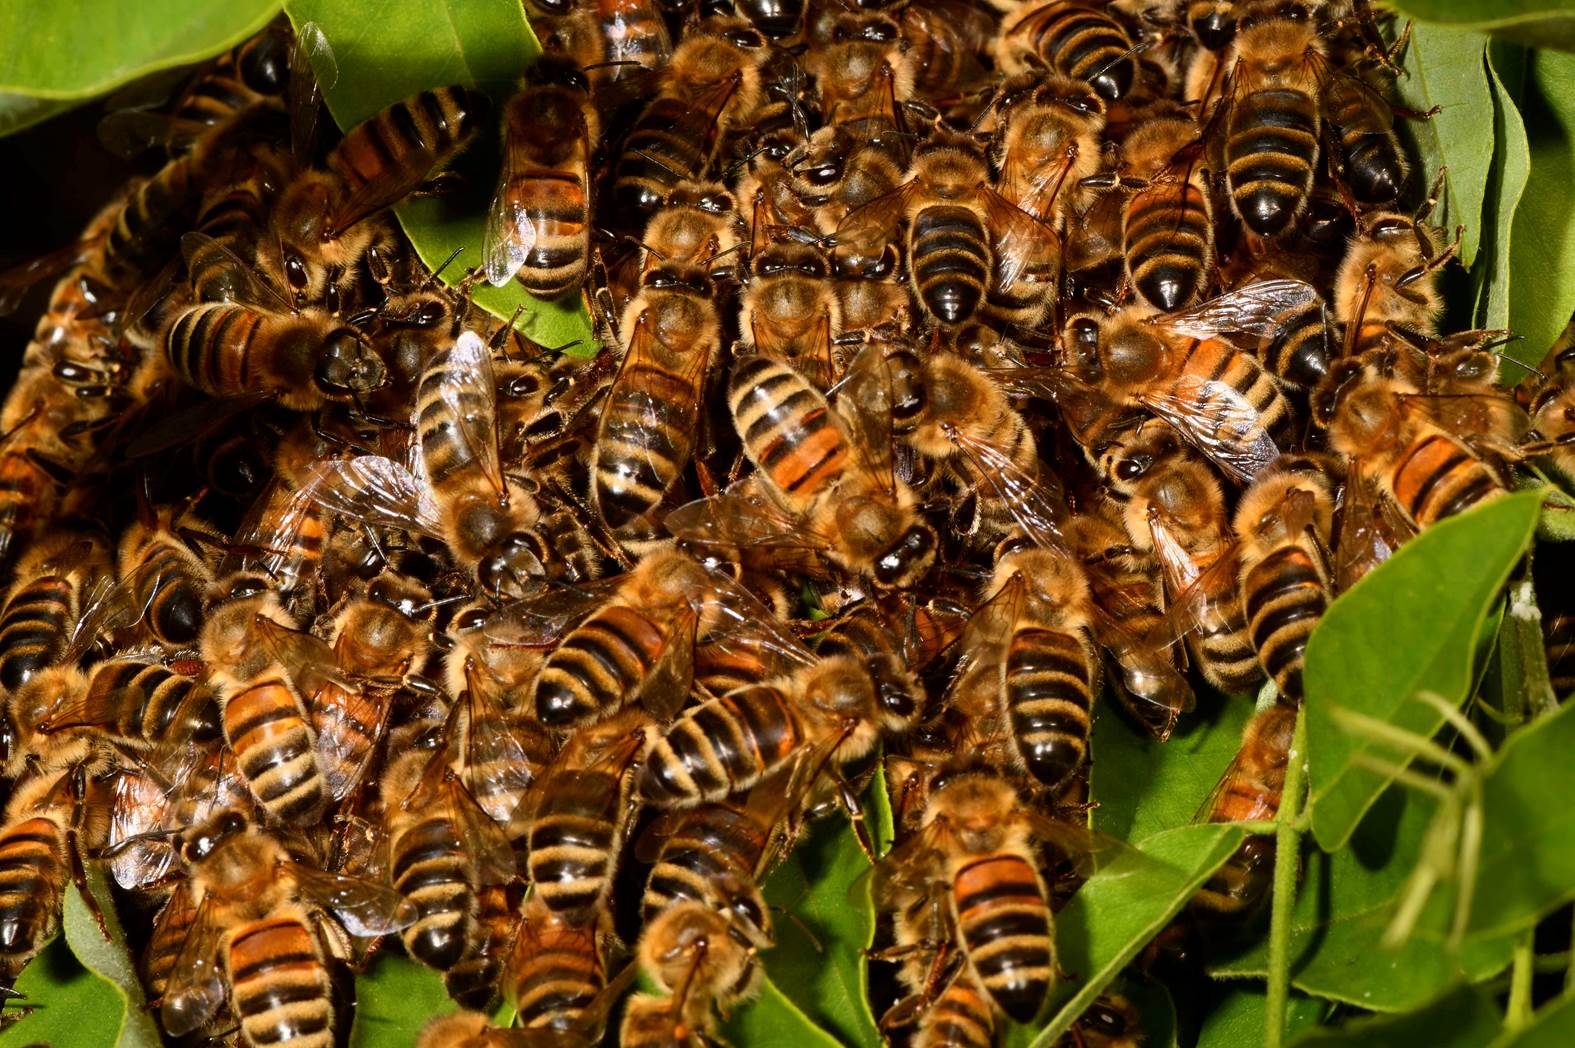 A group of bees on a plant

Description automatically generated with medium confidence